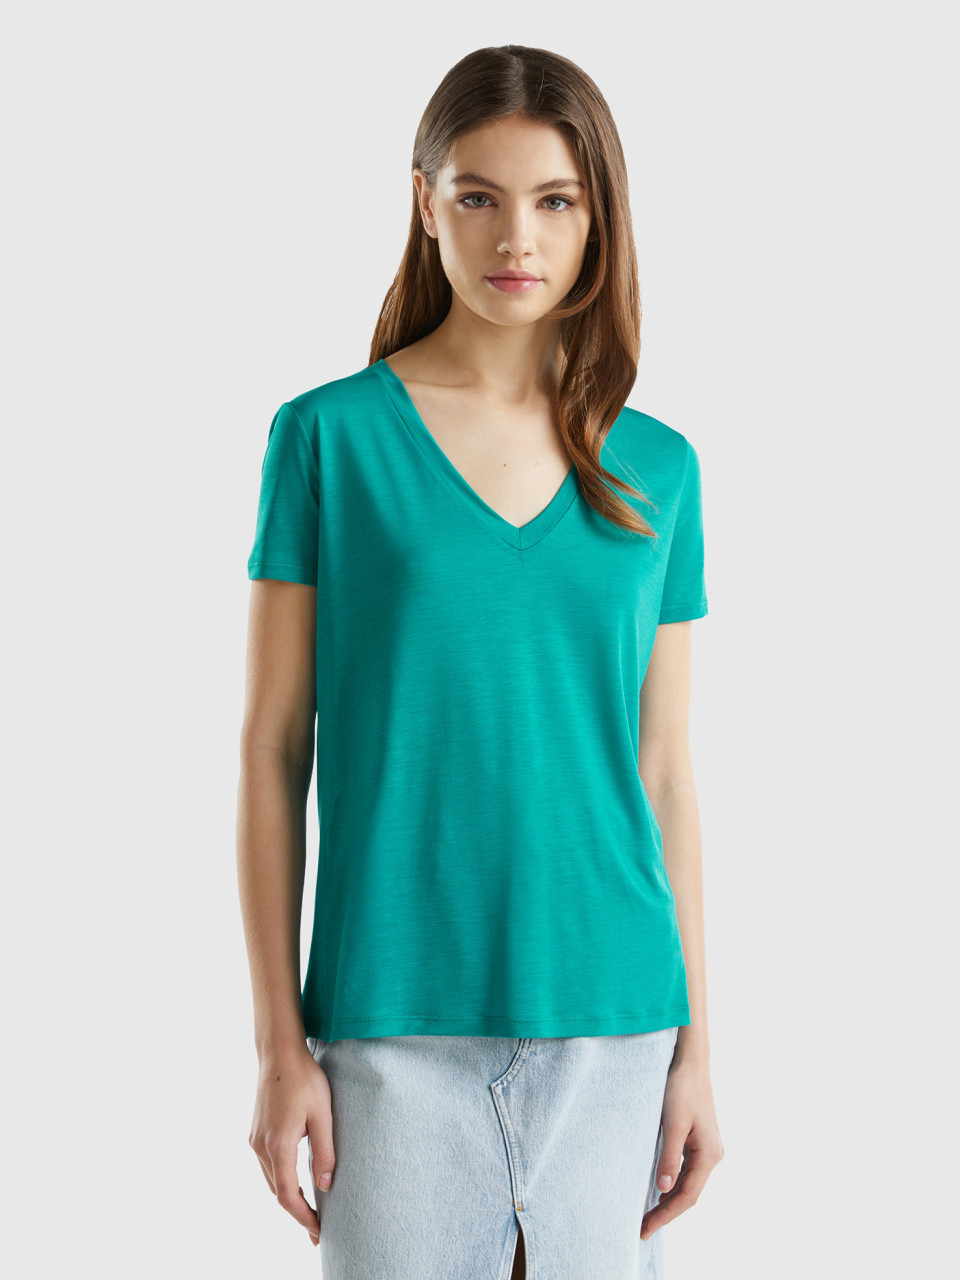 Benetton, V-neck T-shirt In Sustainable Viscose, Teal, Women